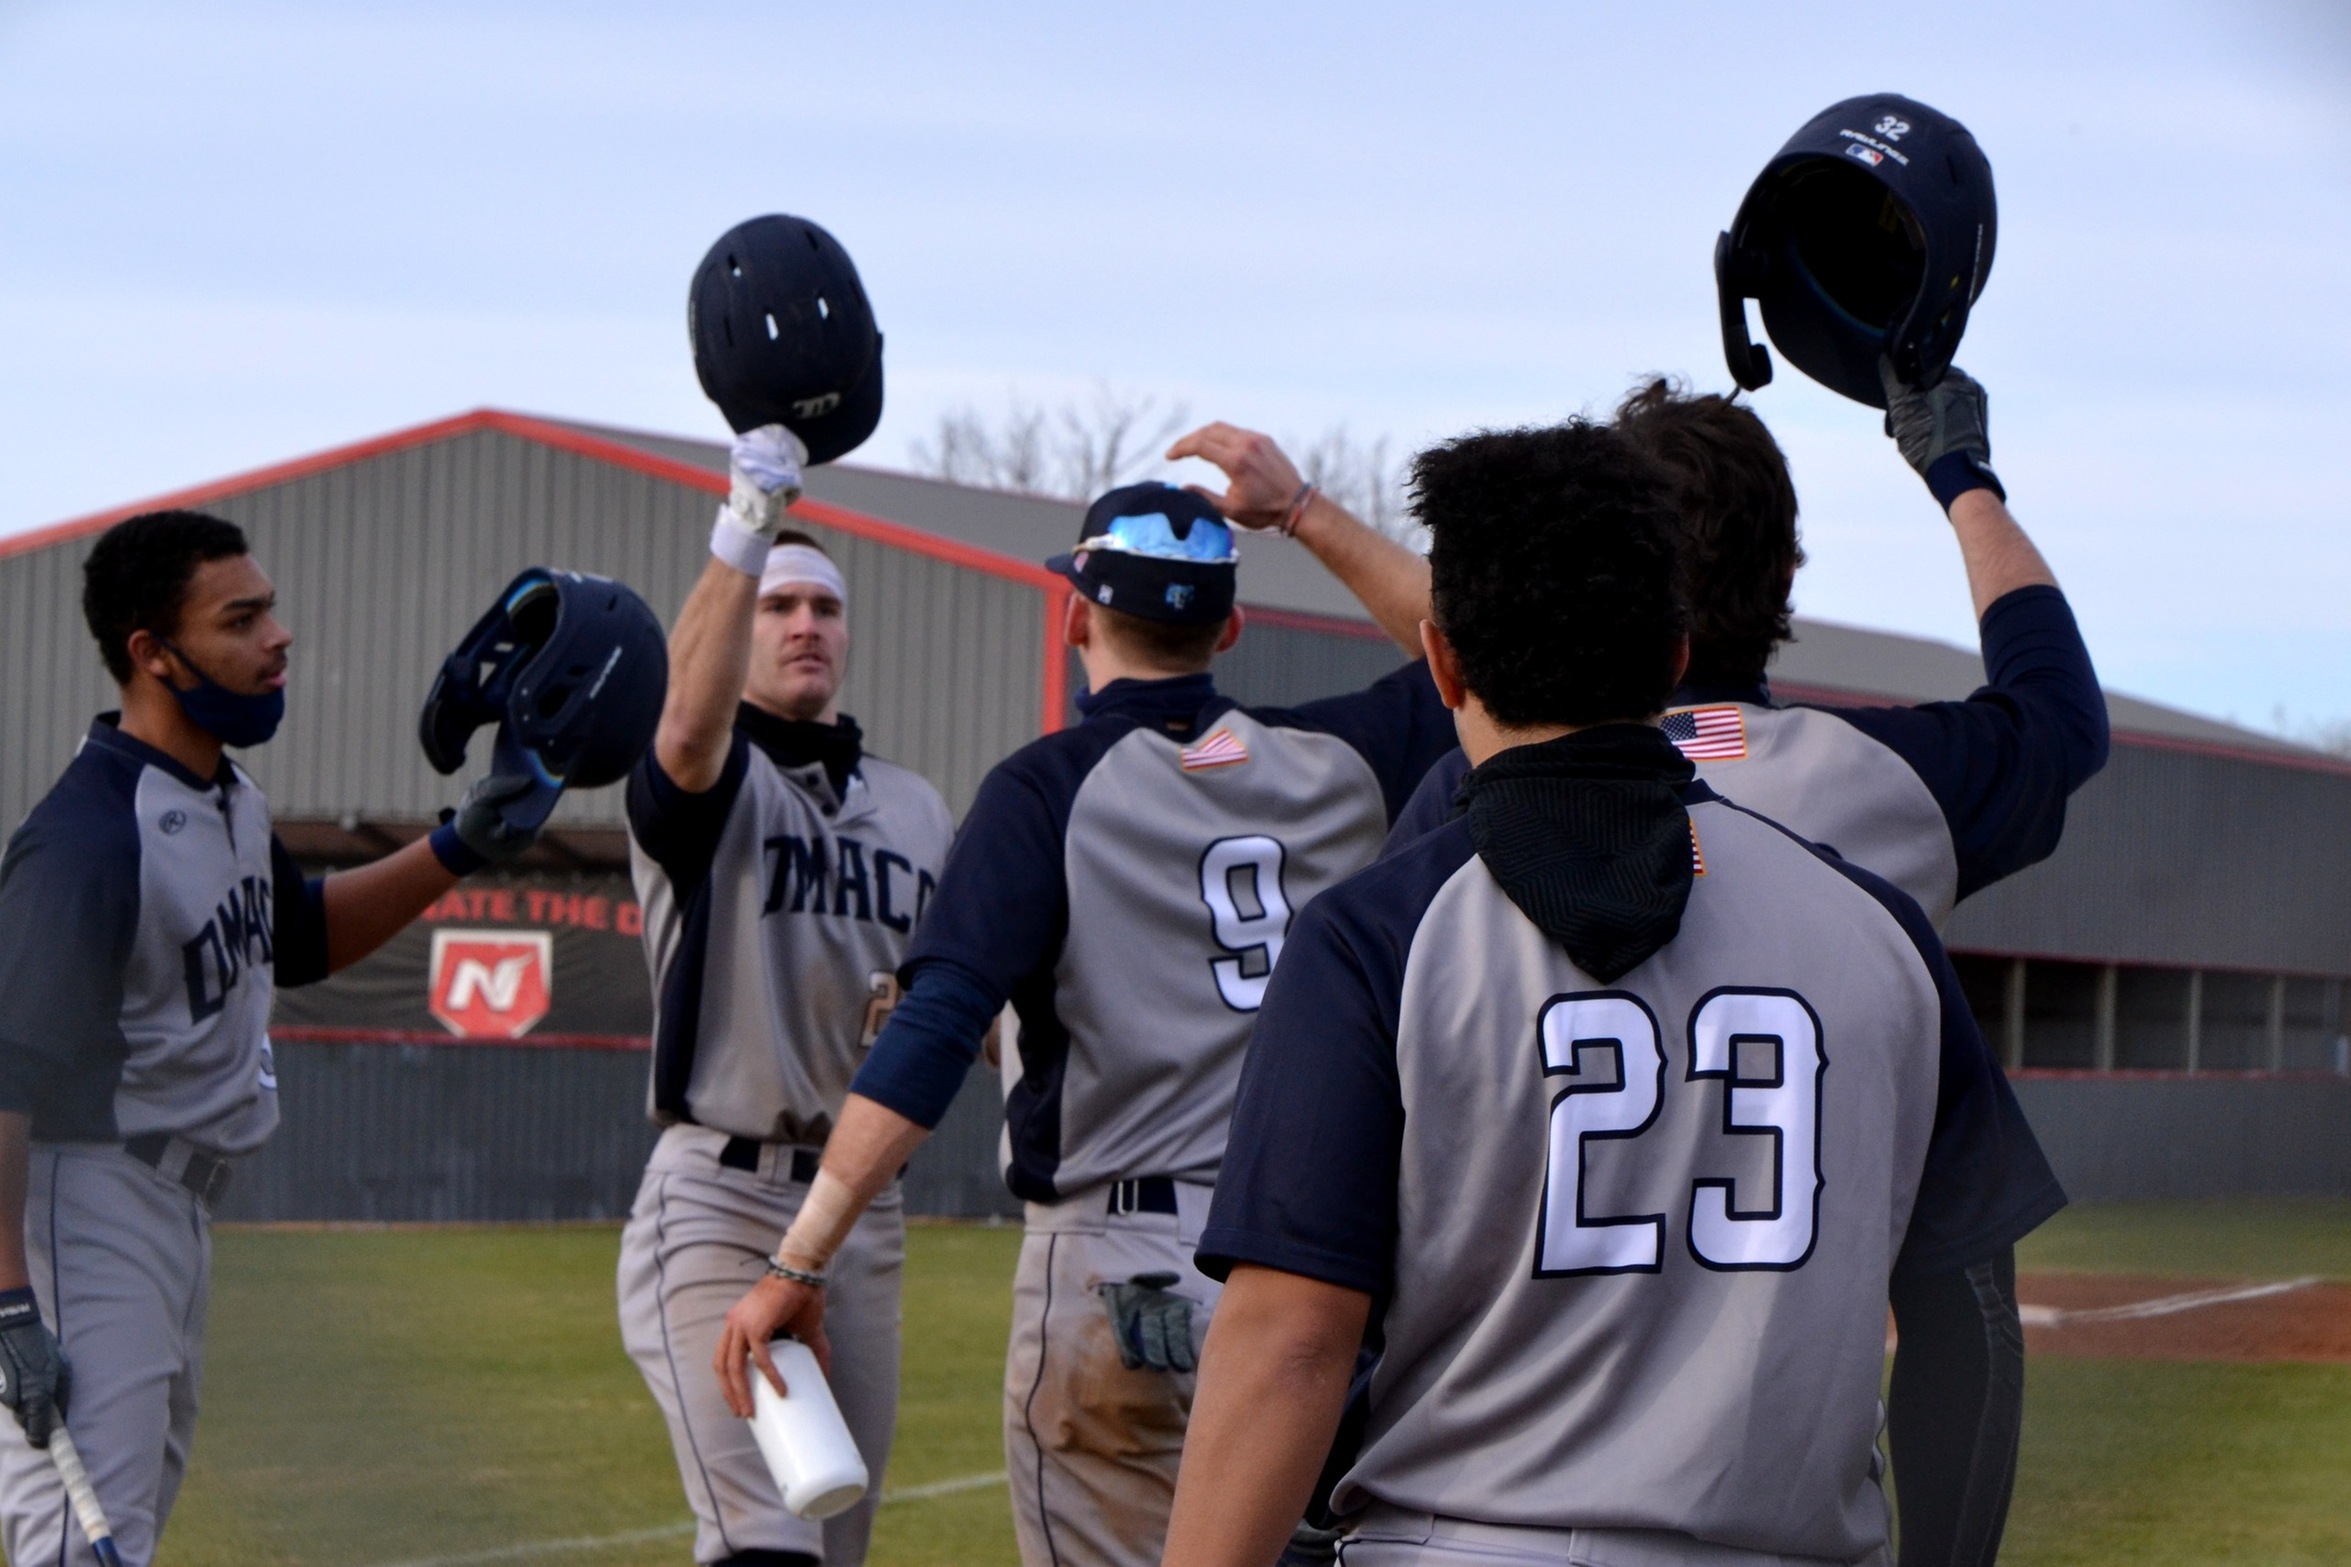 DMACC baseball team sweeps doubleheader against North Central Texas College